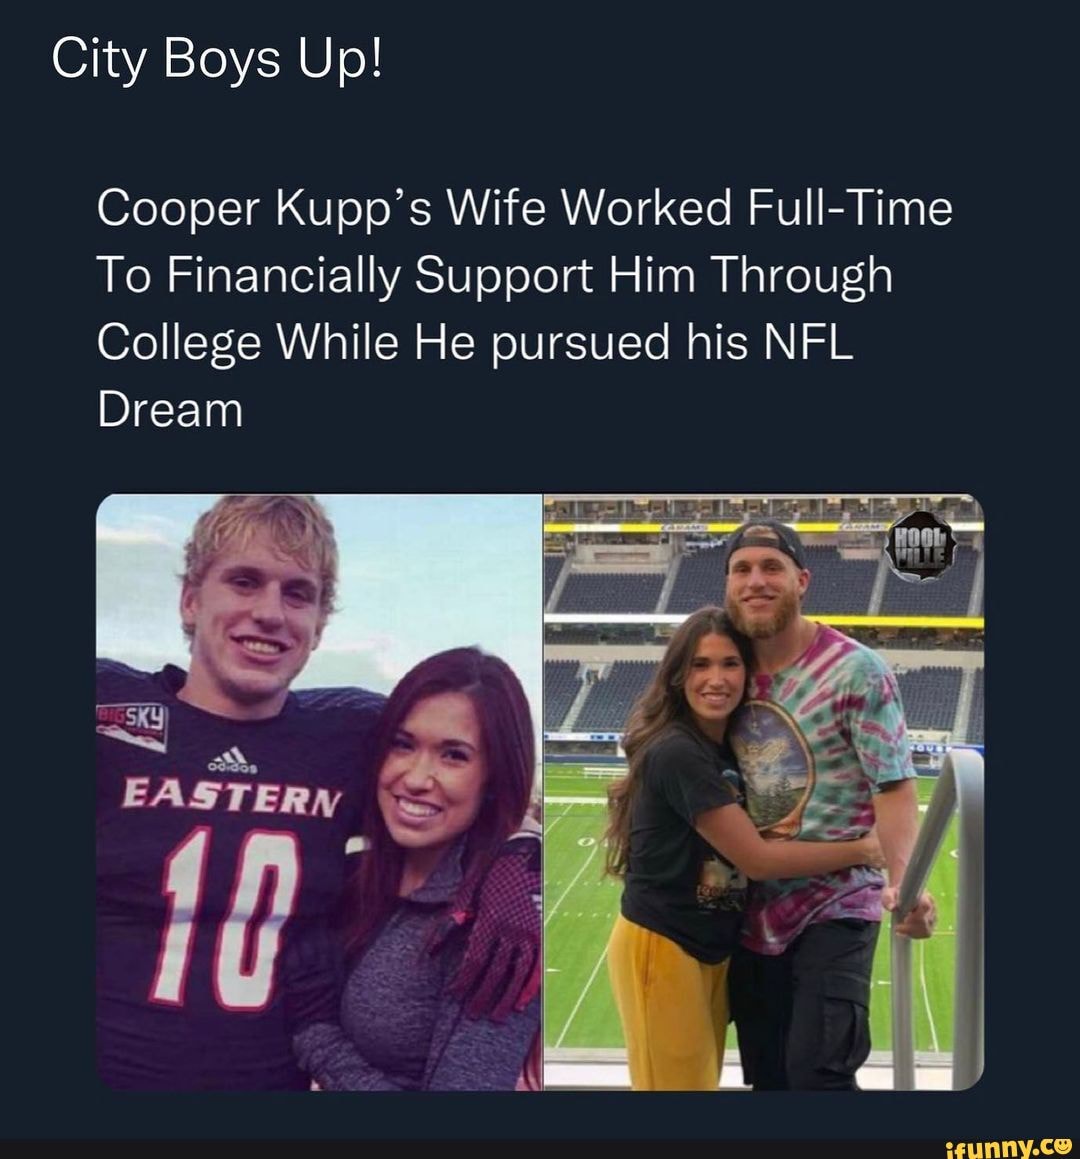 City Boys Up! Cooper Kupp's Wife Worked Full-Time To Financially